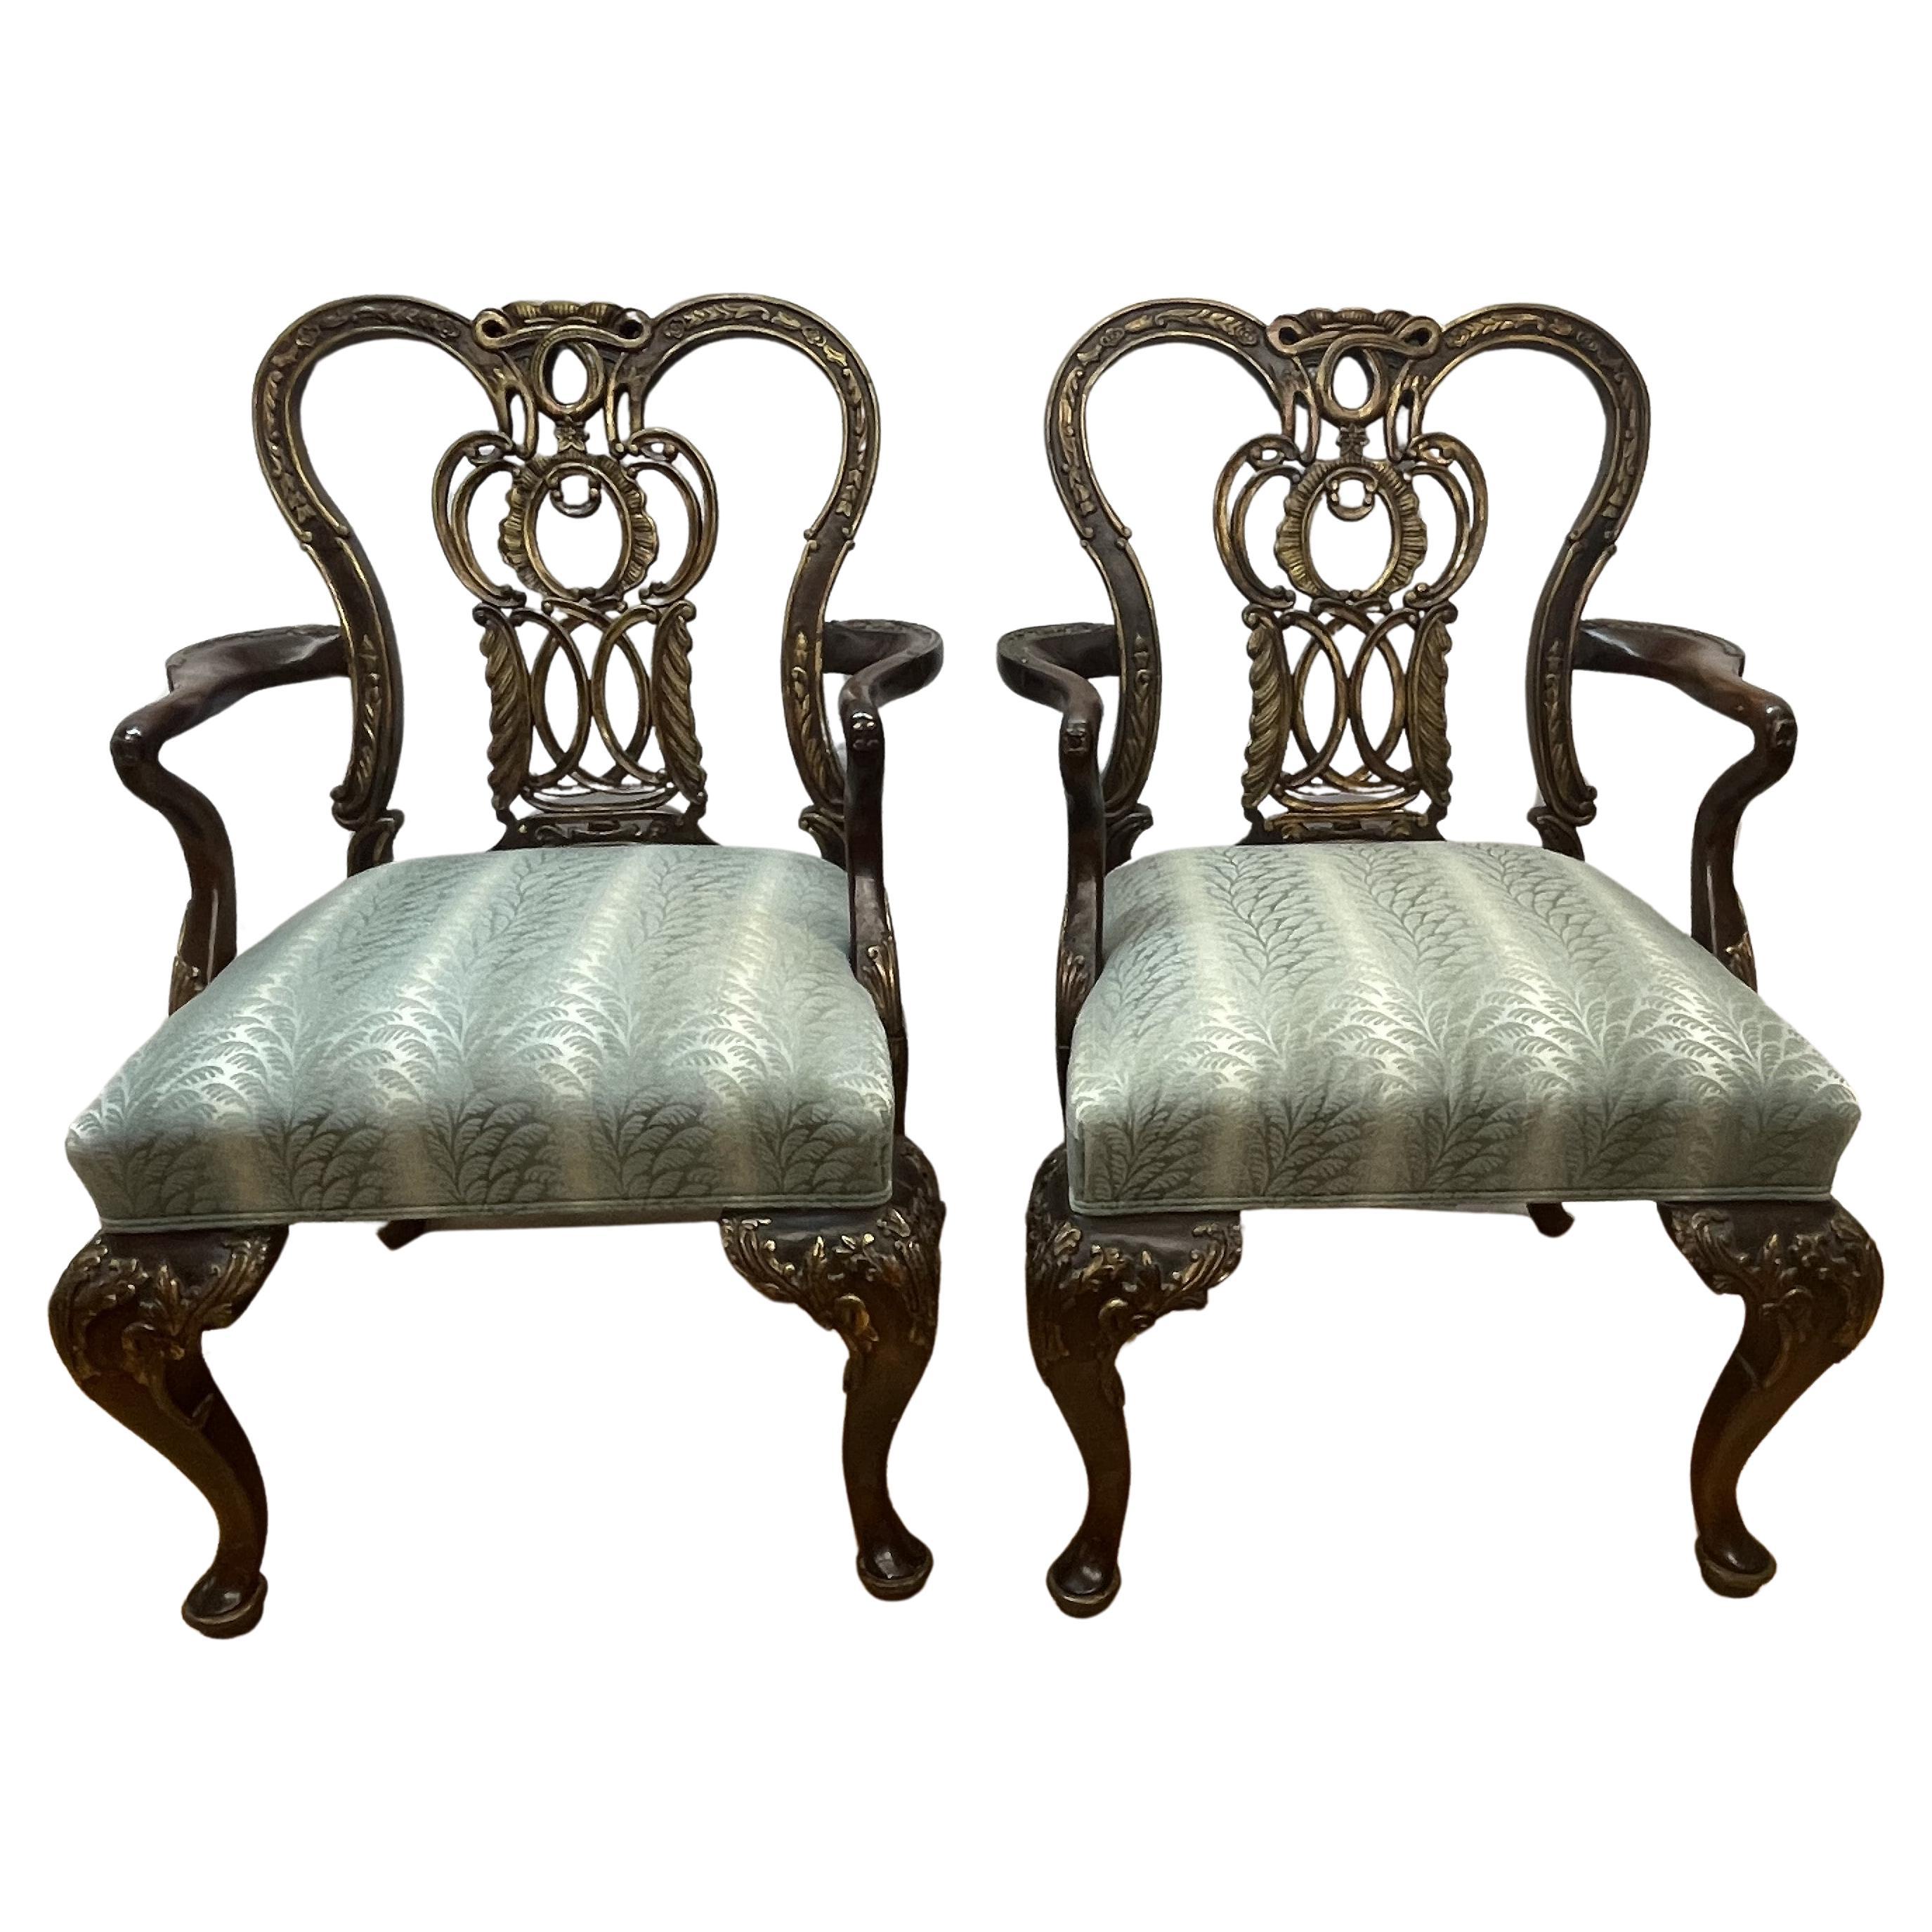 Pair of mahogany century armchair Chippendale revival